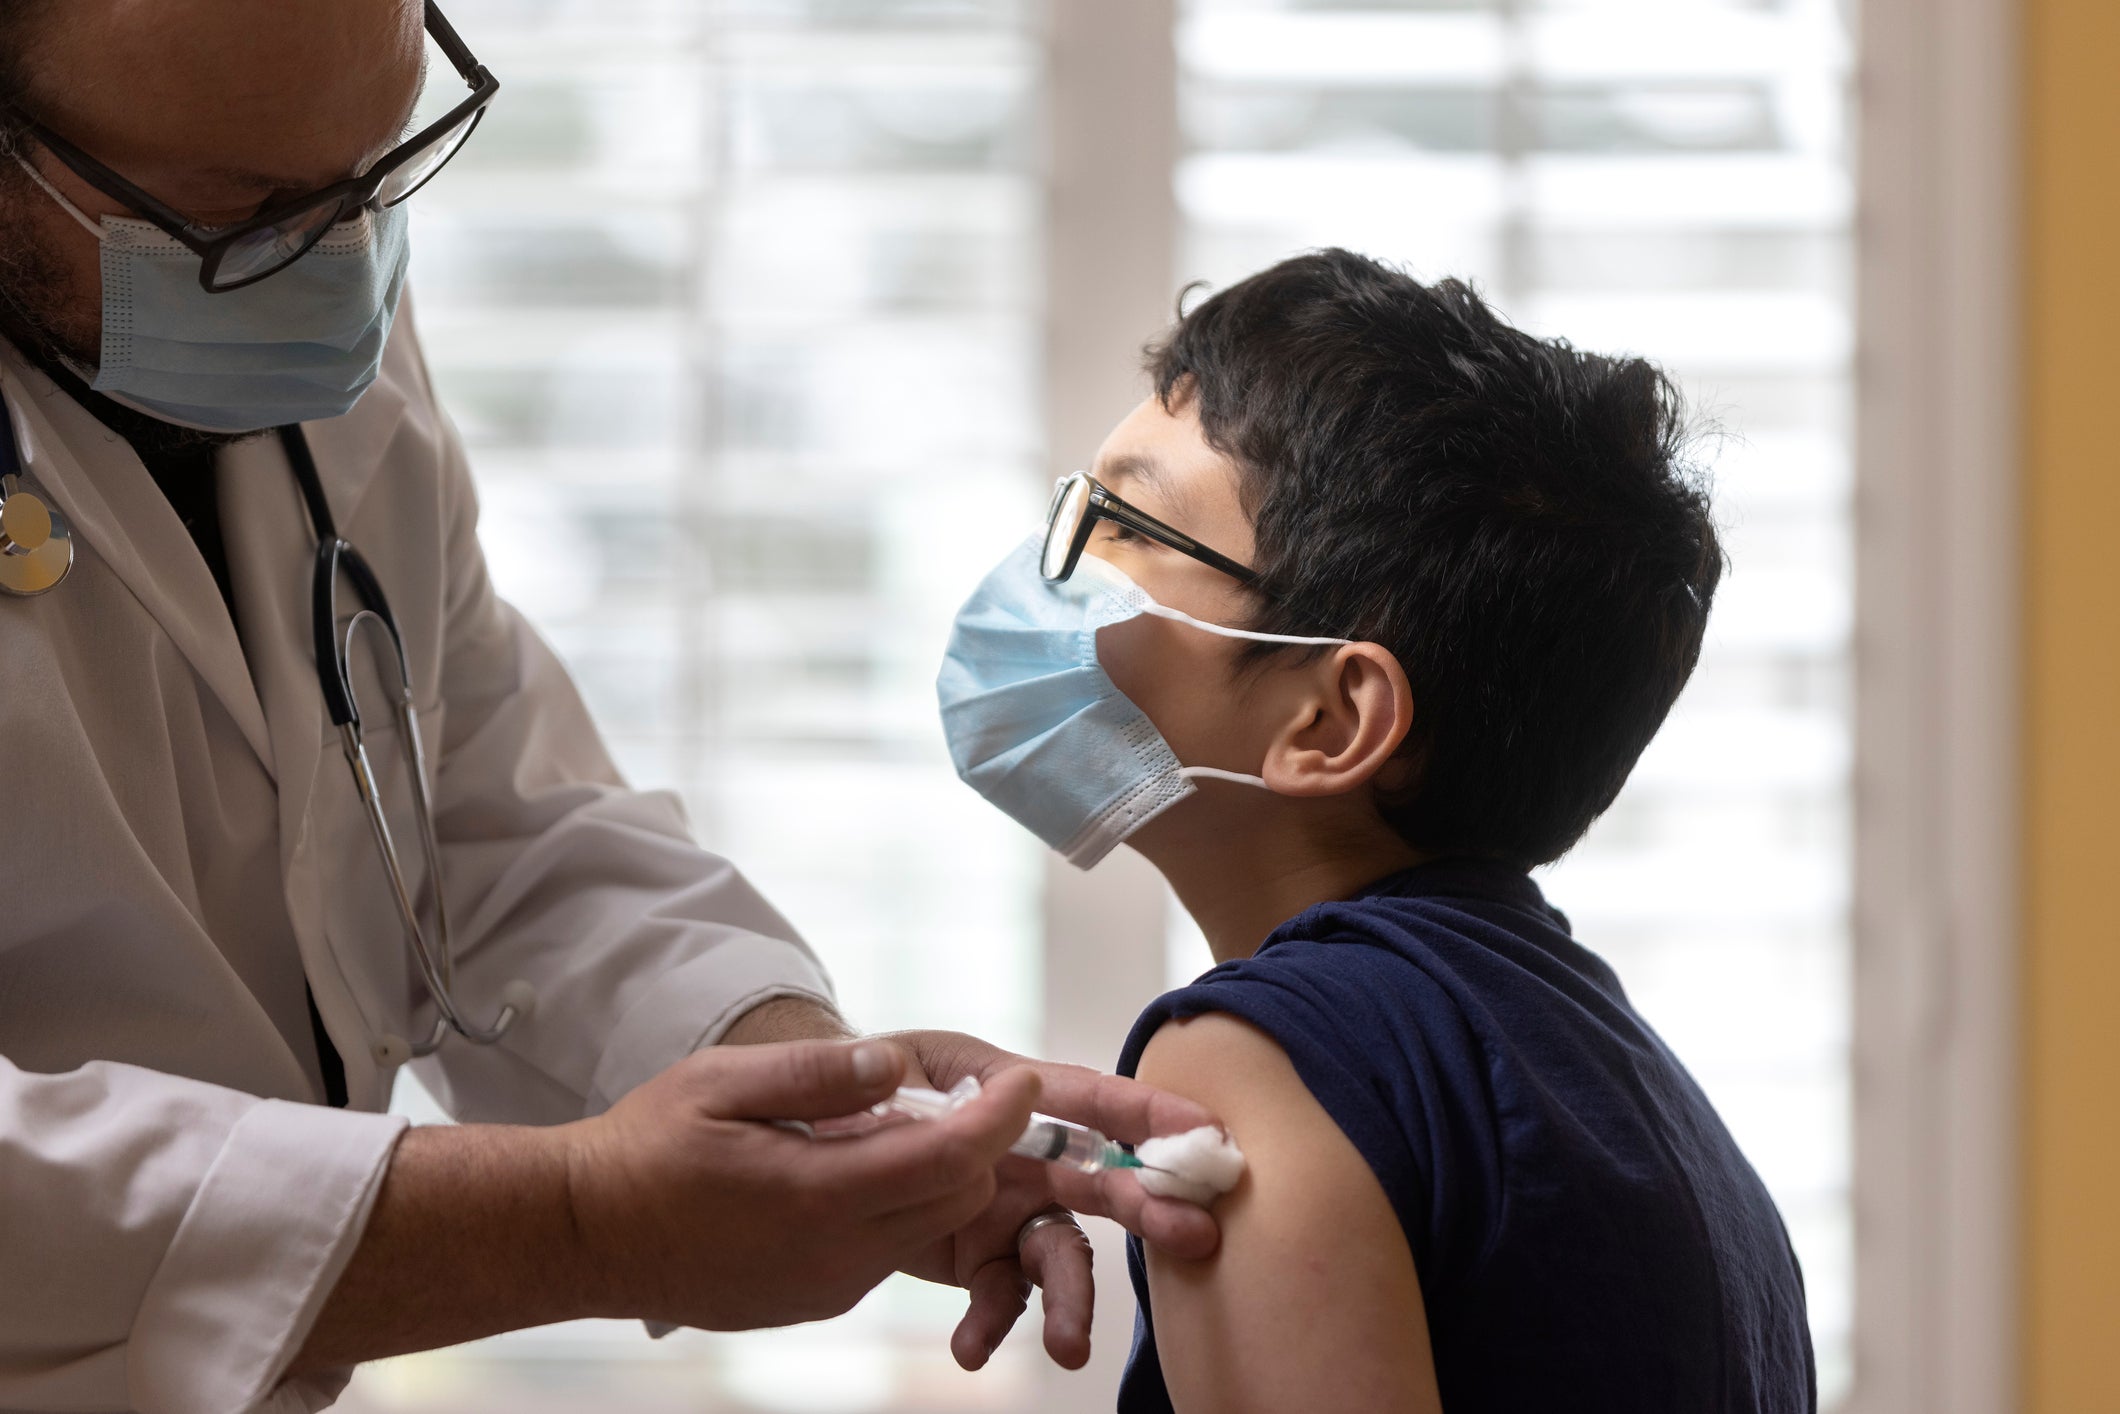 Figures from NHS England suggest 3.4 million children are unvaccinated